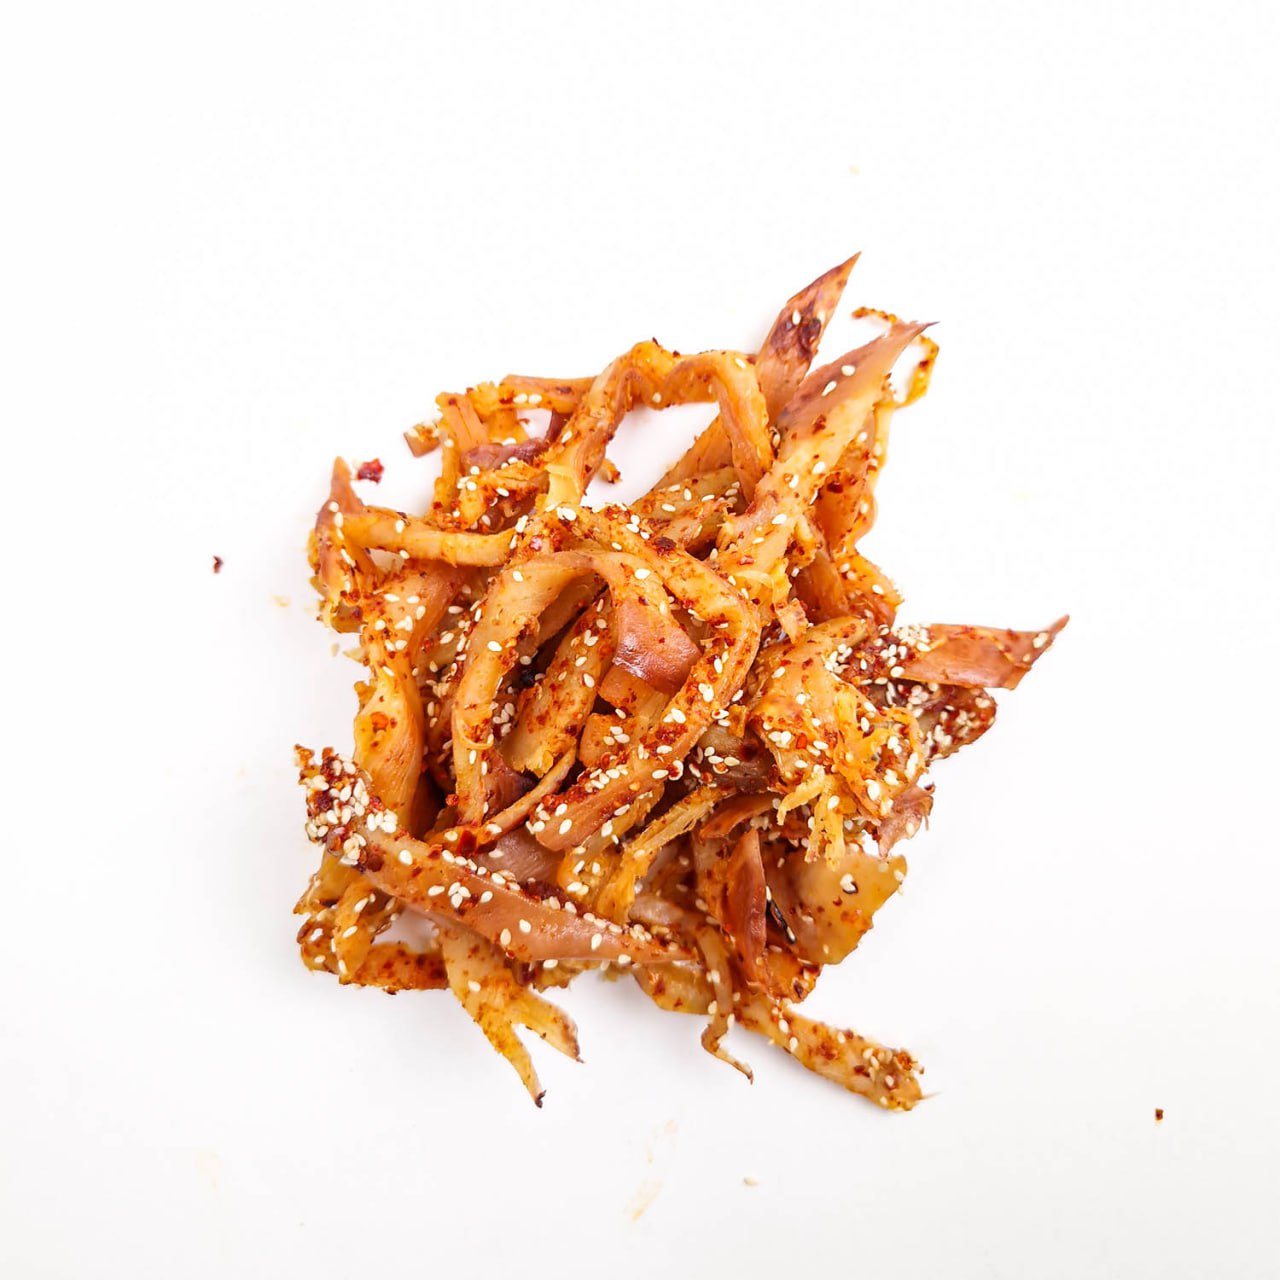 Dried squid with sesame seeds and chili peppers (sticks)